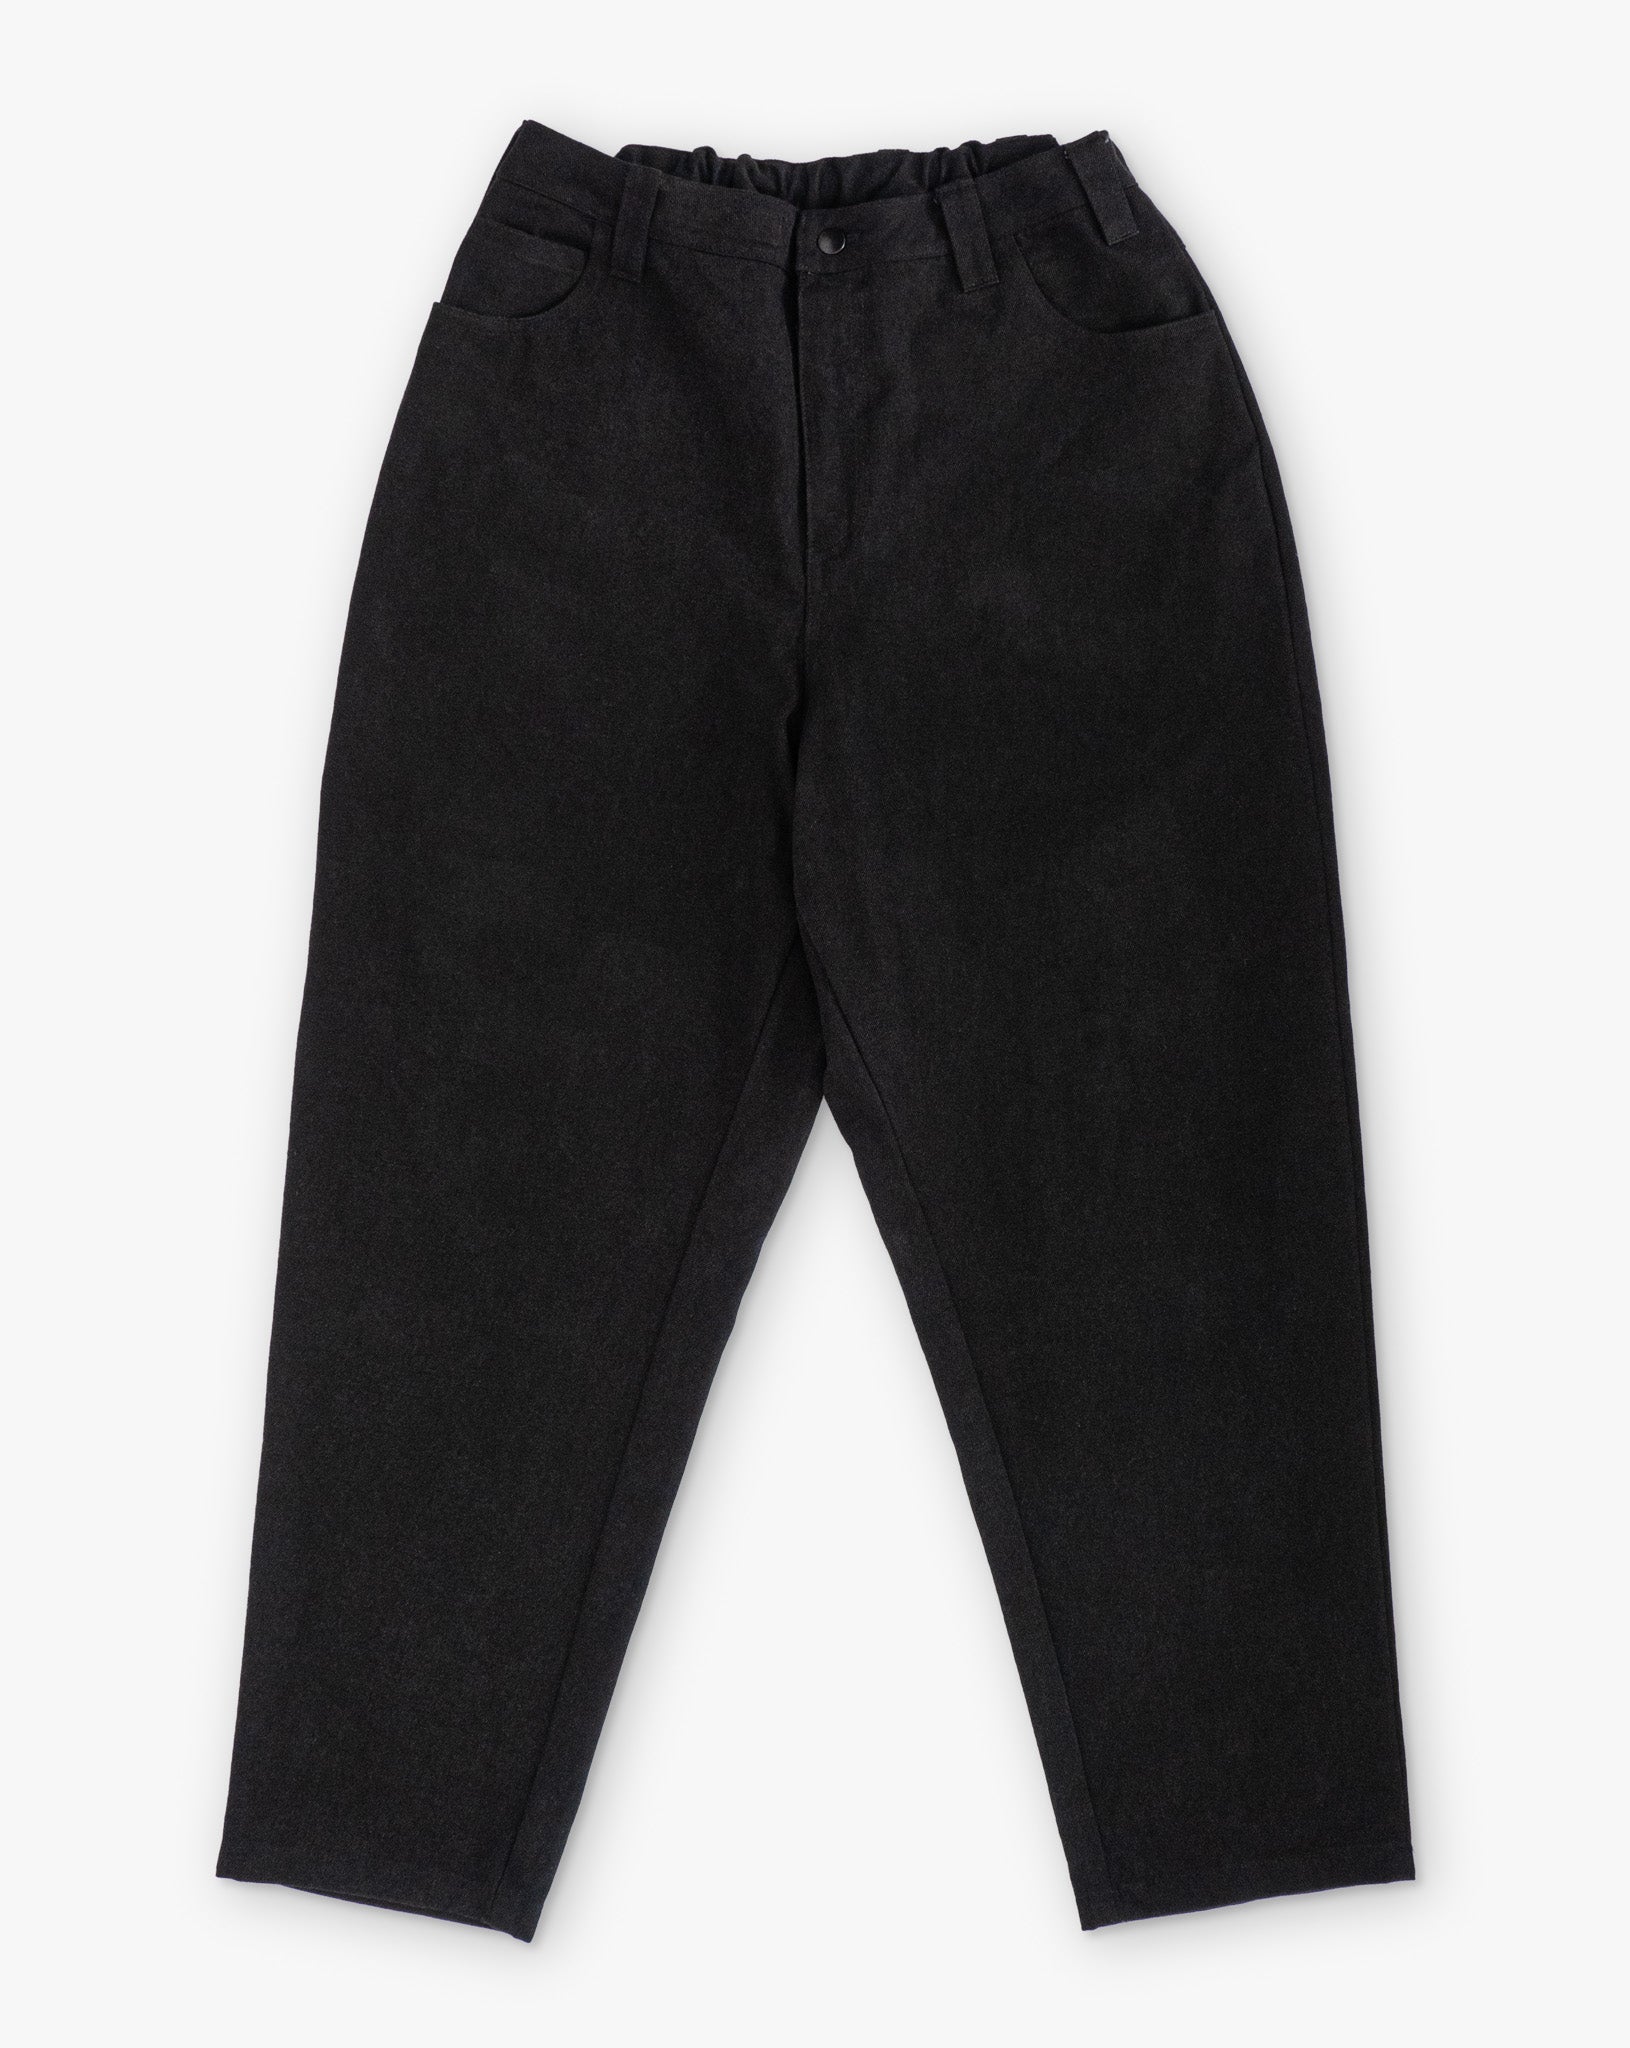 POETIC COLLECTIVE Tapered Pants BLACK